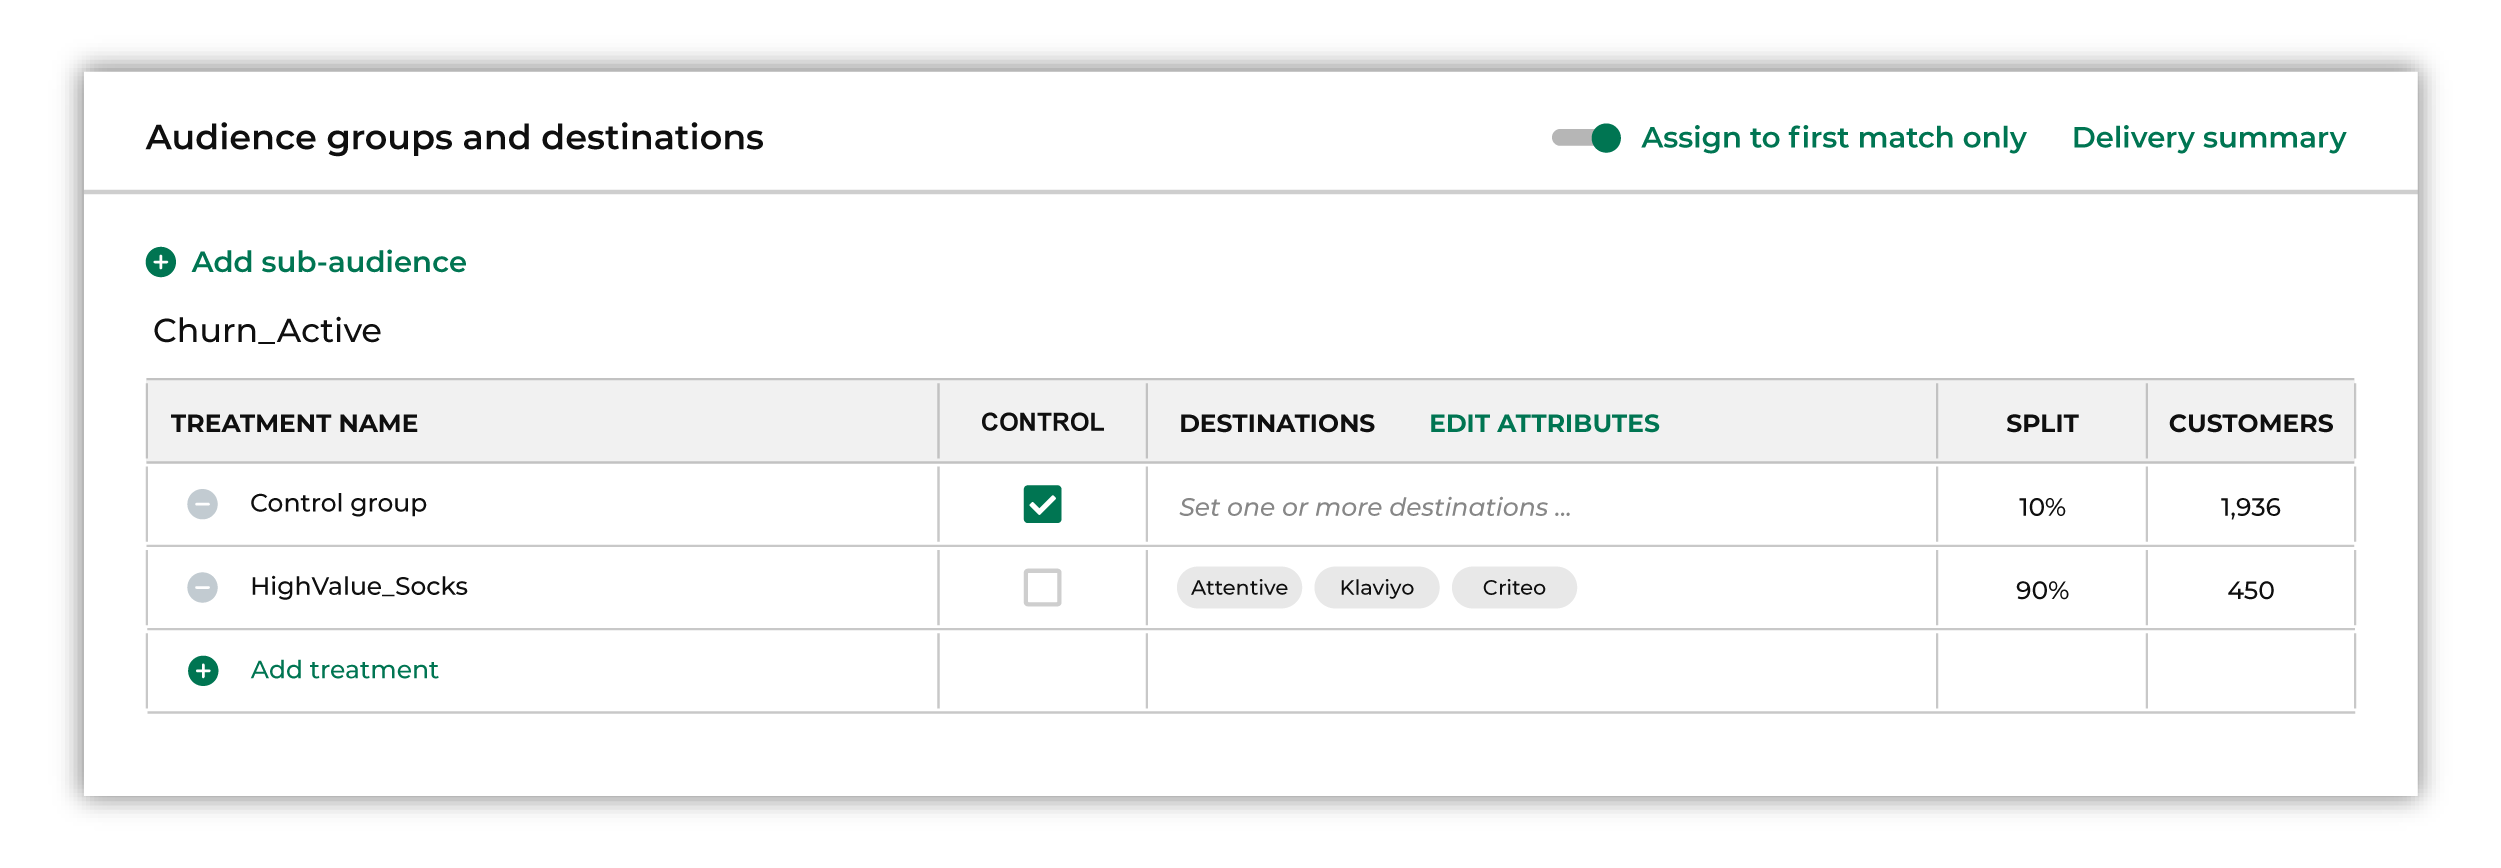 Destinations for customers with an active lifecycle status.